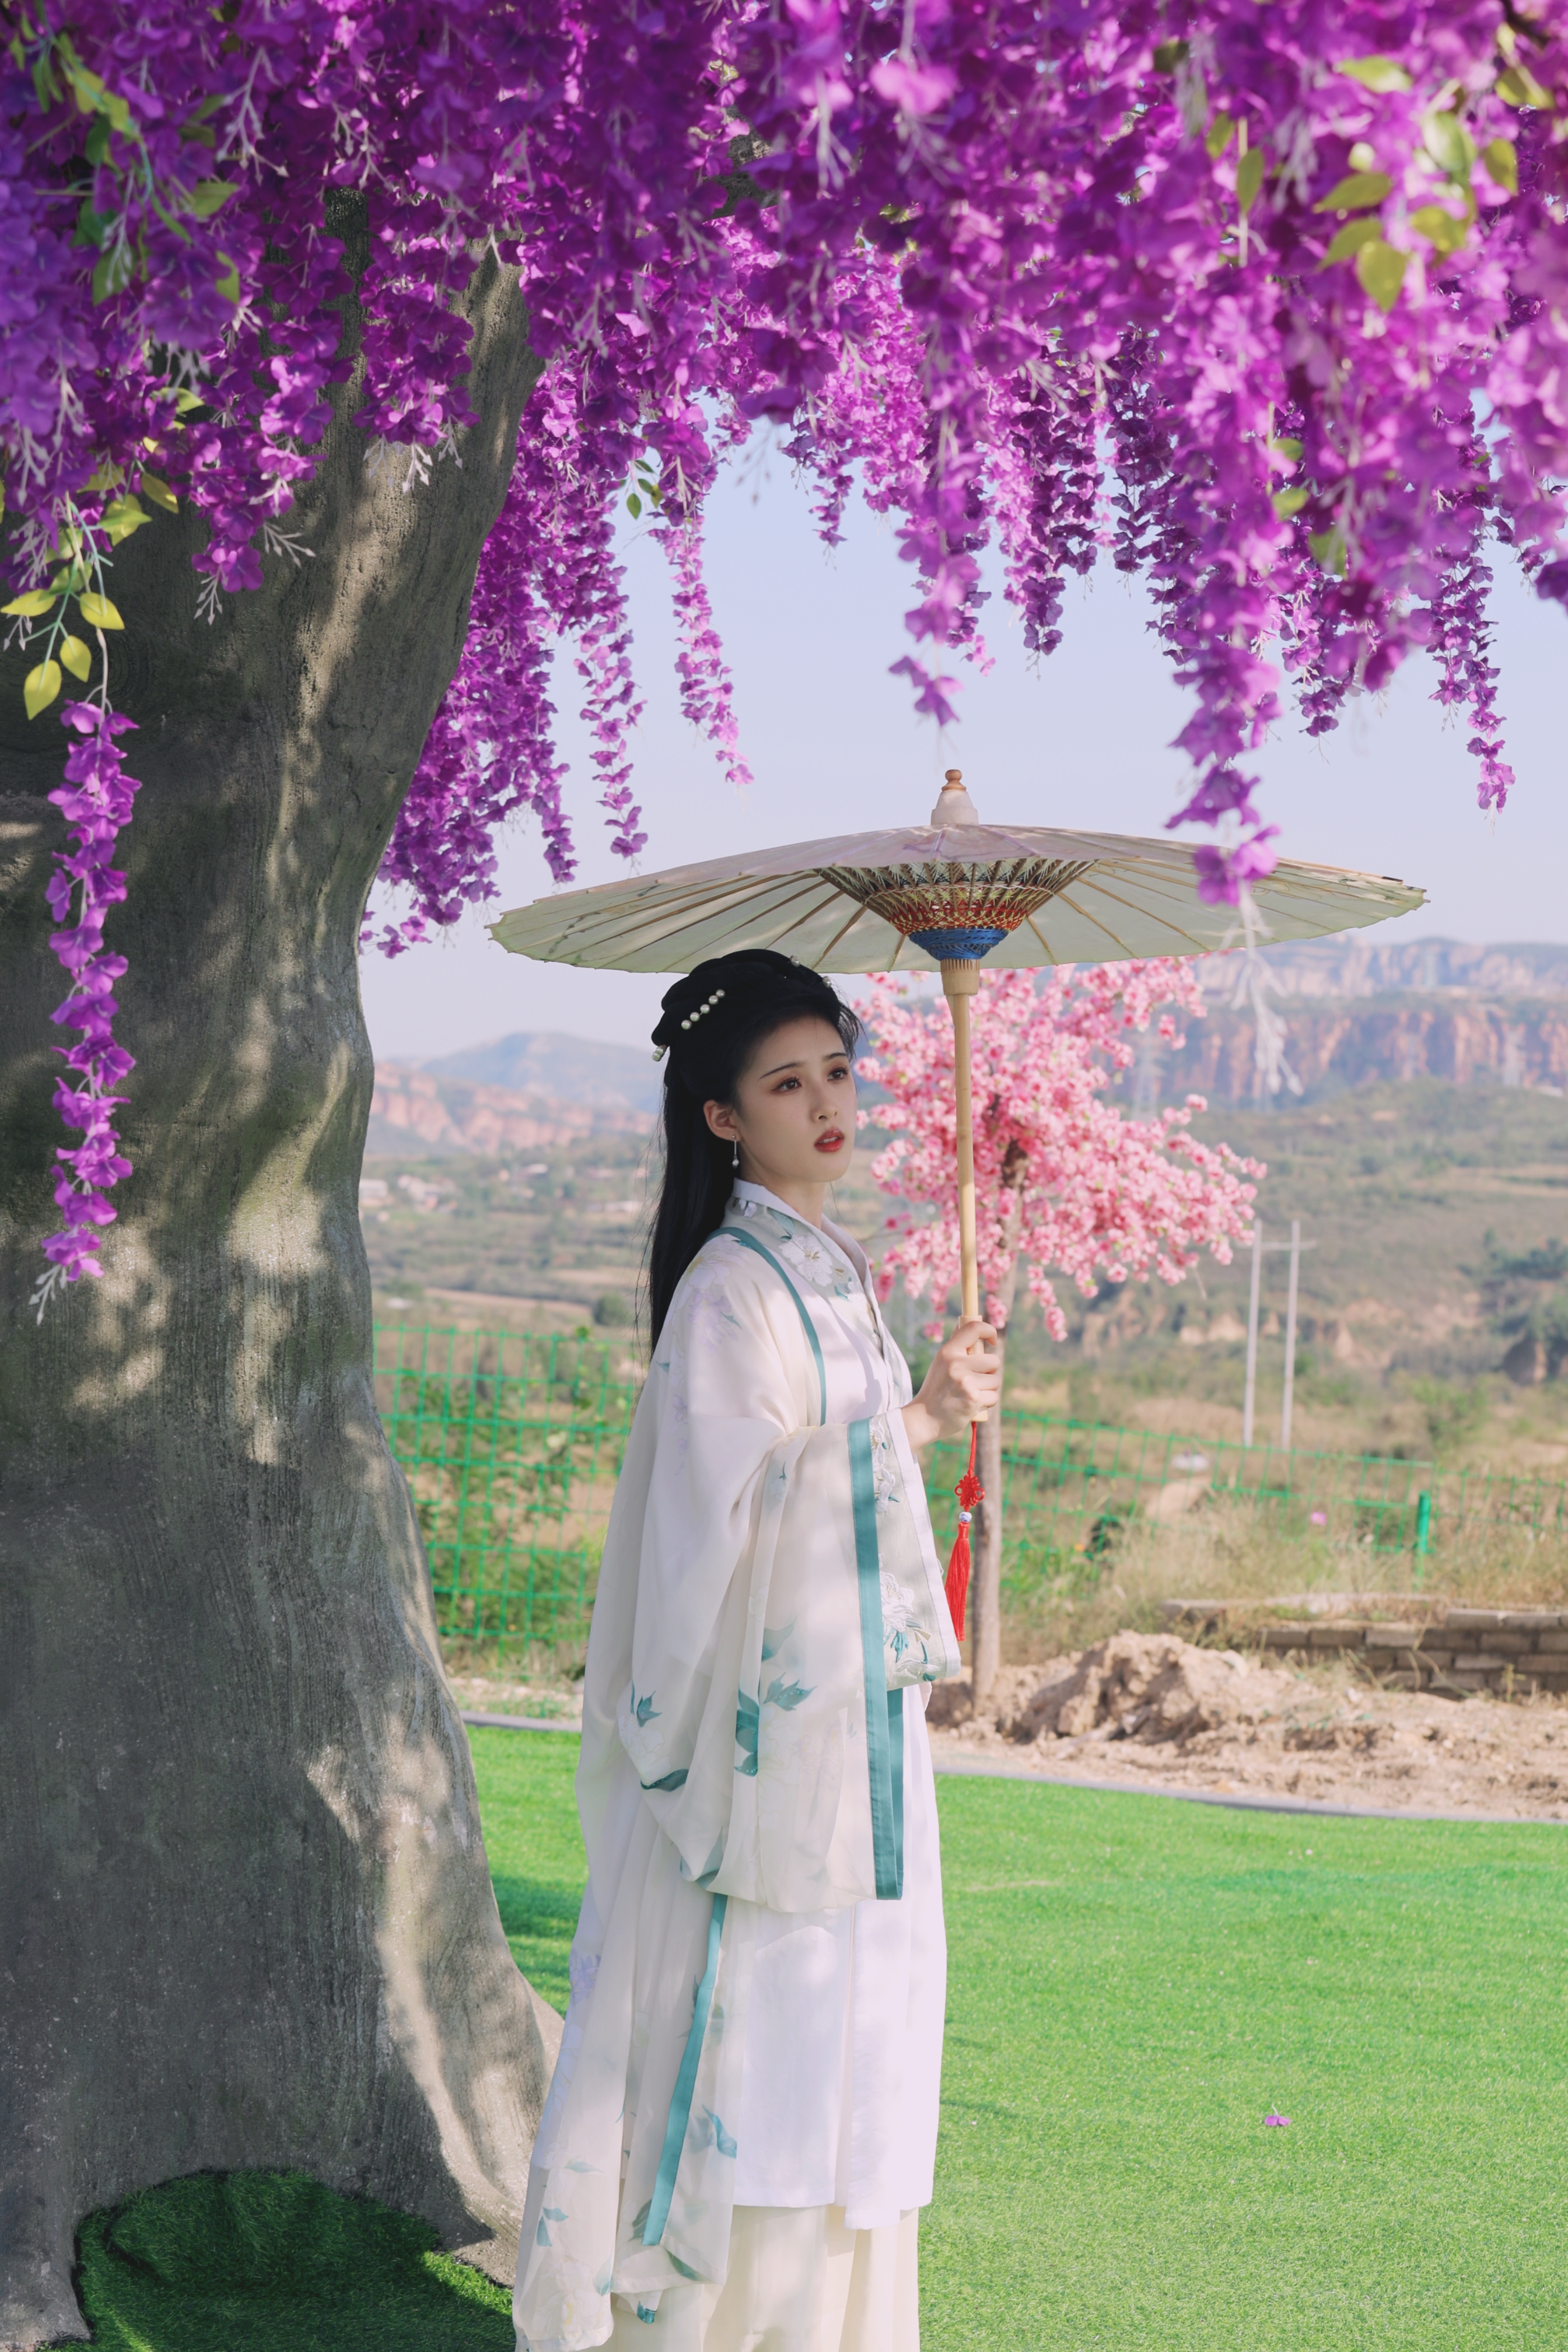 Women Chinese Parasol Outdoors Flowers Asian 2688x4032